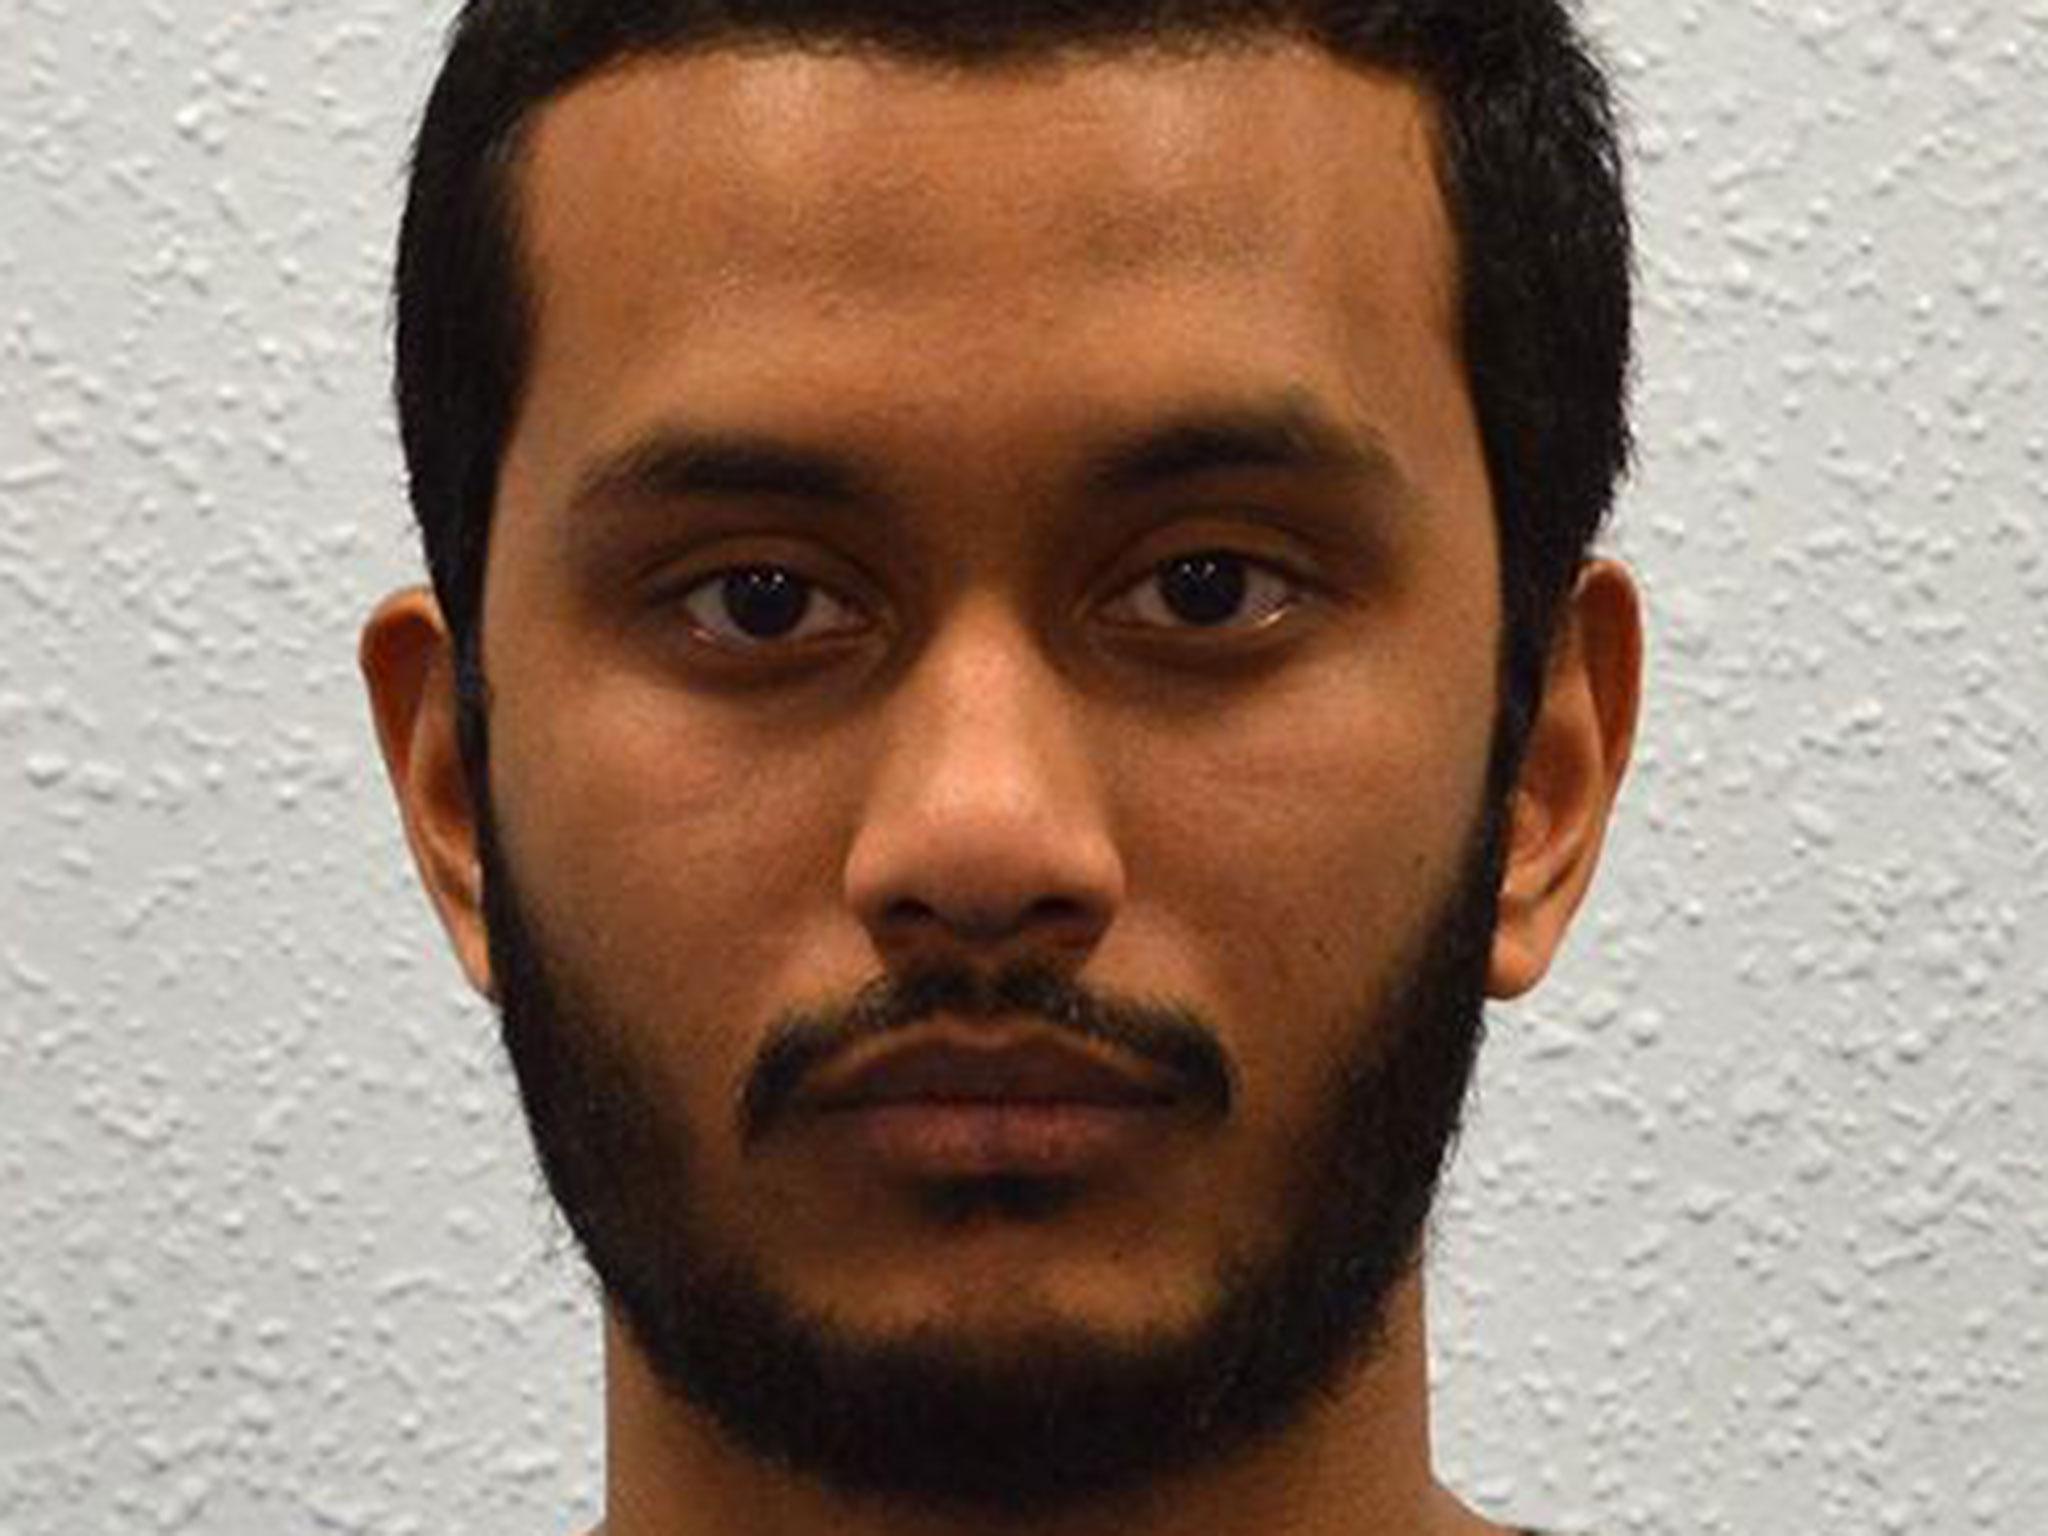 Jabed Hussain has been convicted of two counts of preparing terrorist acts